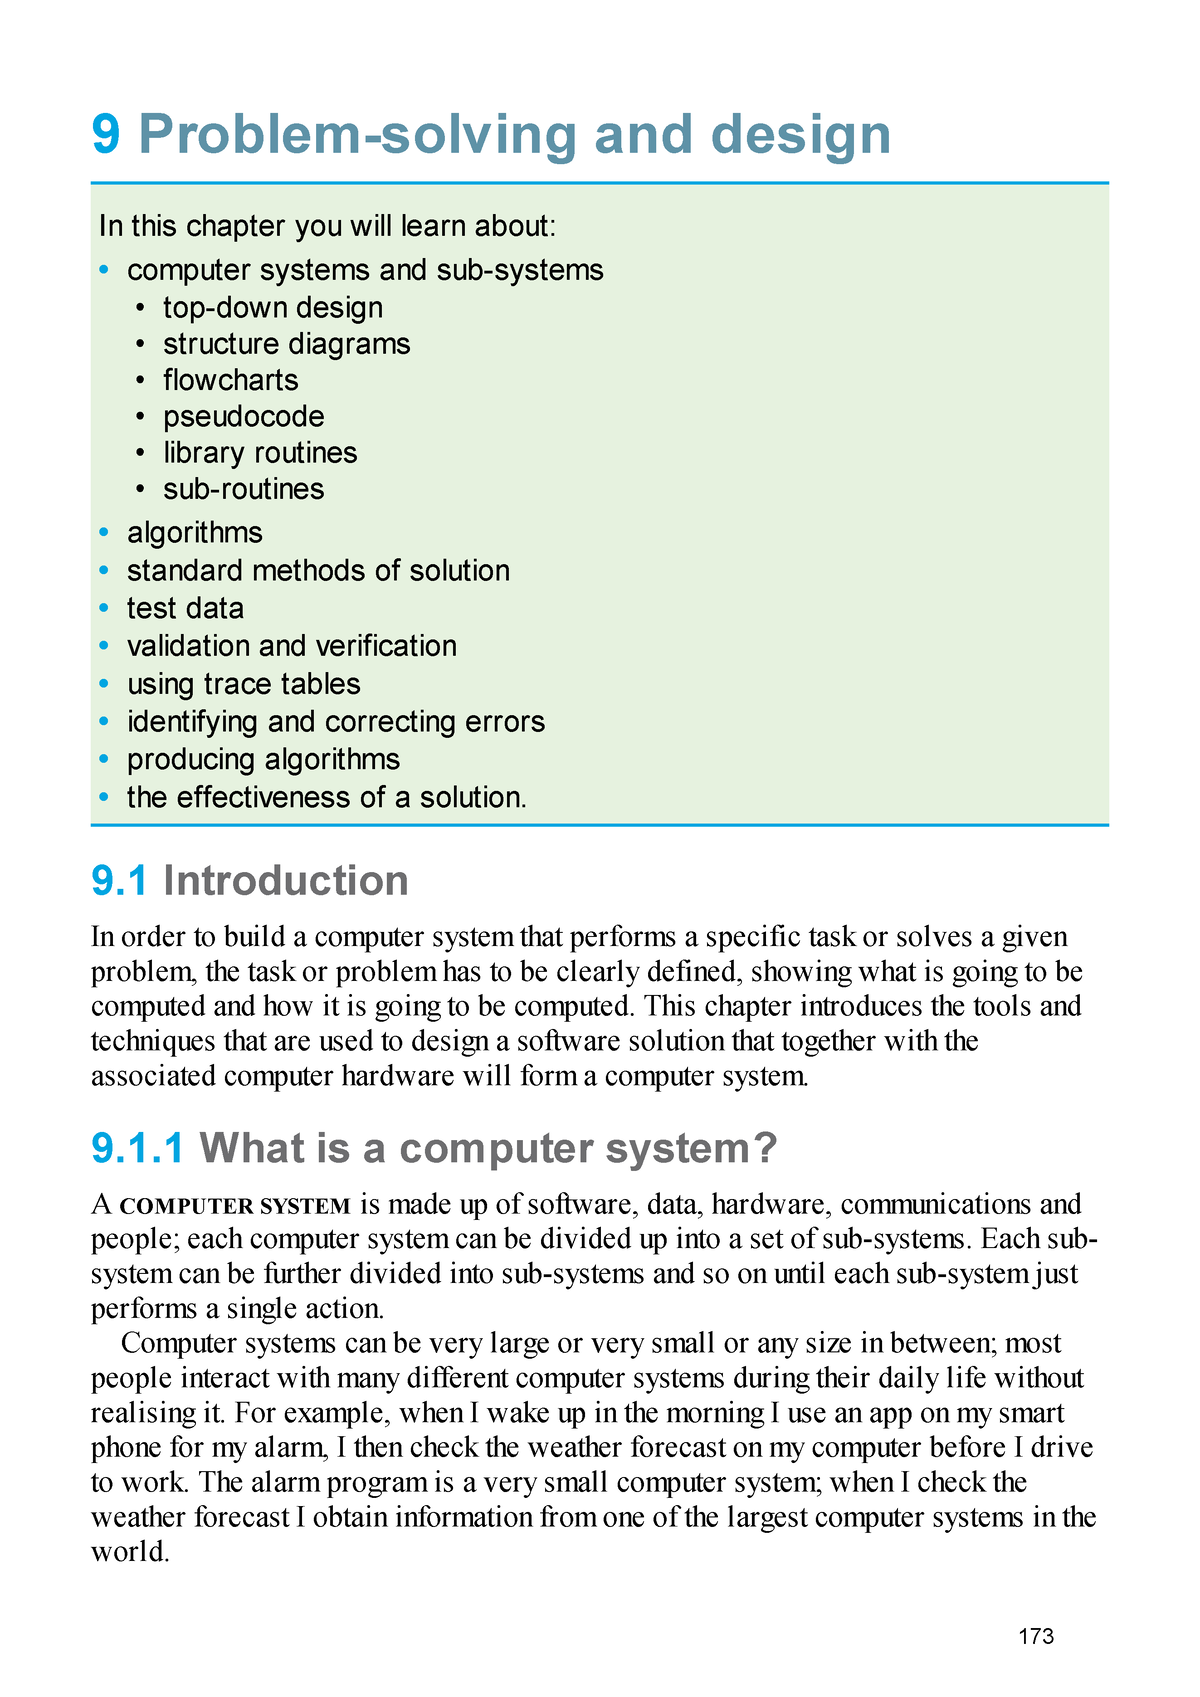 problem solving and design igcse computer science past papers